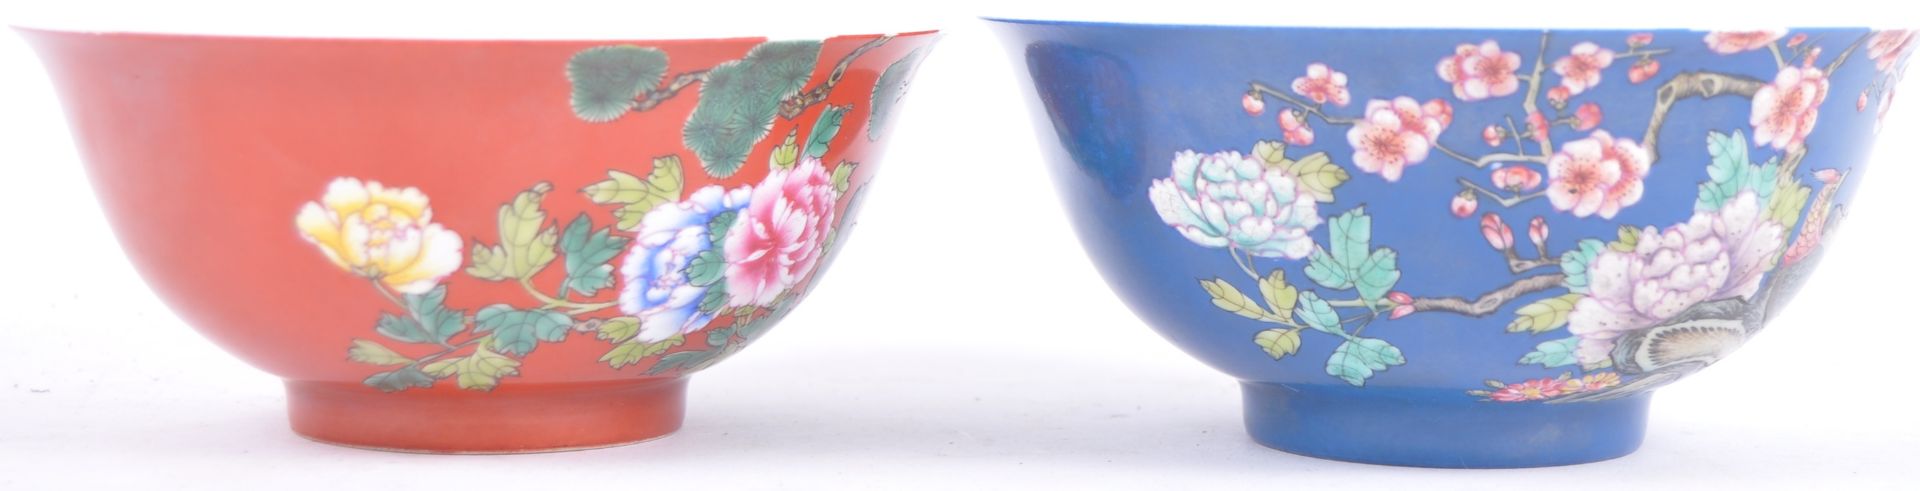 PAIR OF 20TH CENTURY CHINESE REPUBLIC PORCELAIN BOWLS - Image 2 of 6